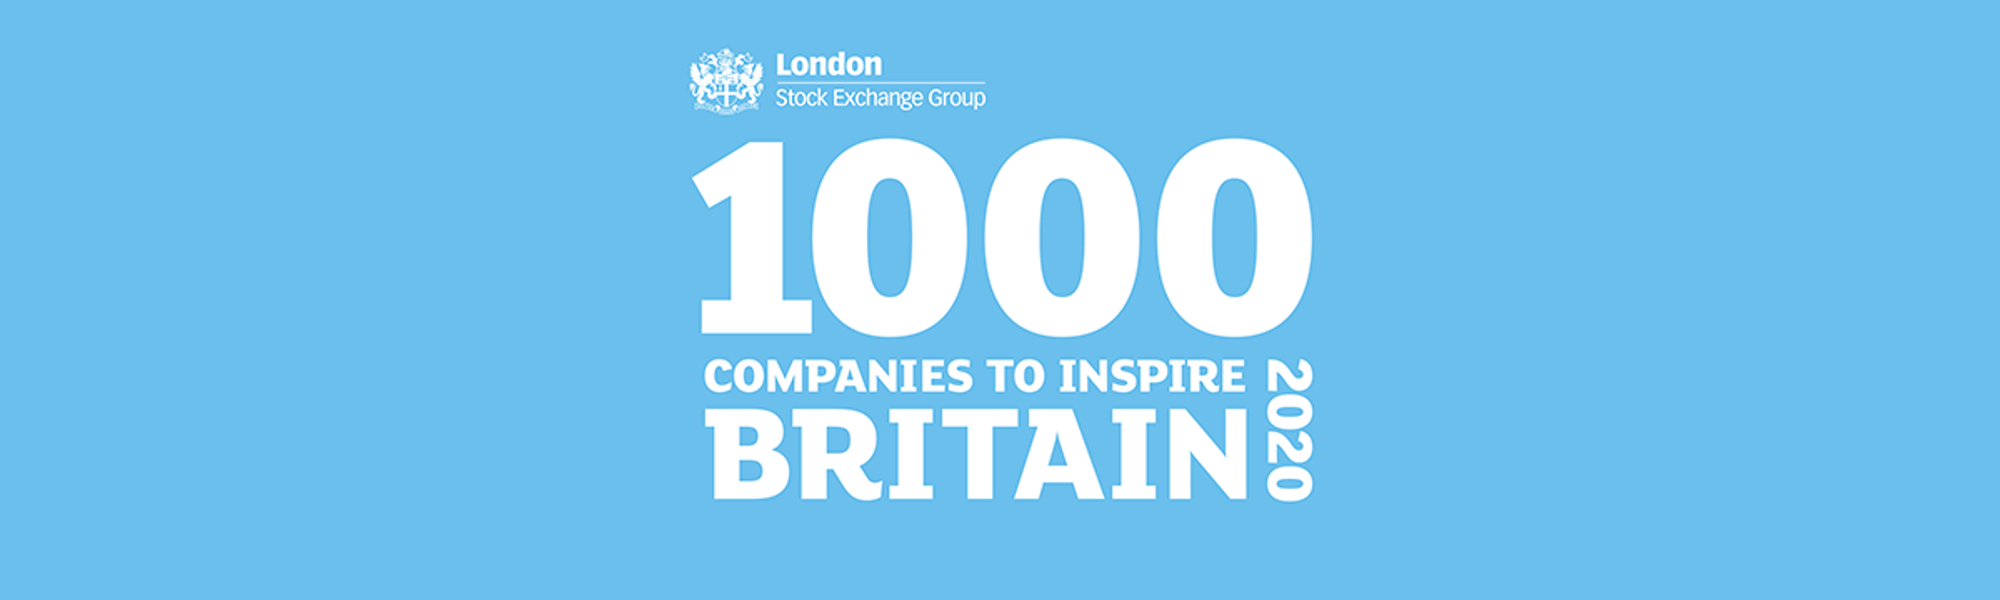 Top 1000 Companies To Inspire Britain’ 2020